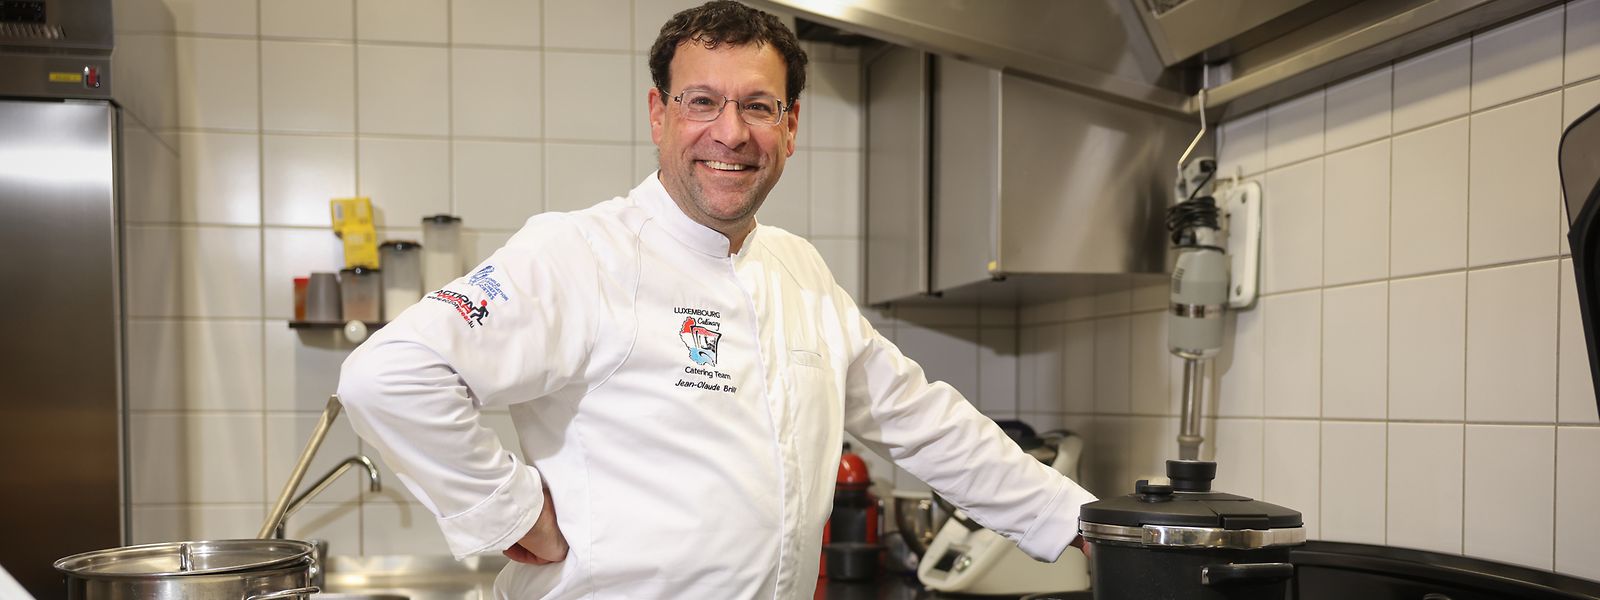 Jean-Claude Brill ist Teamleiter des Luxembourg Culinary Catering Team.